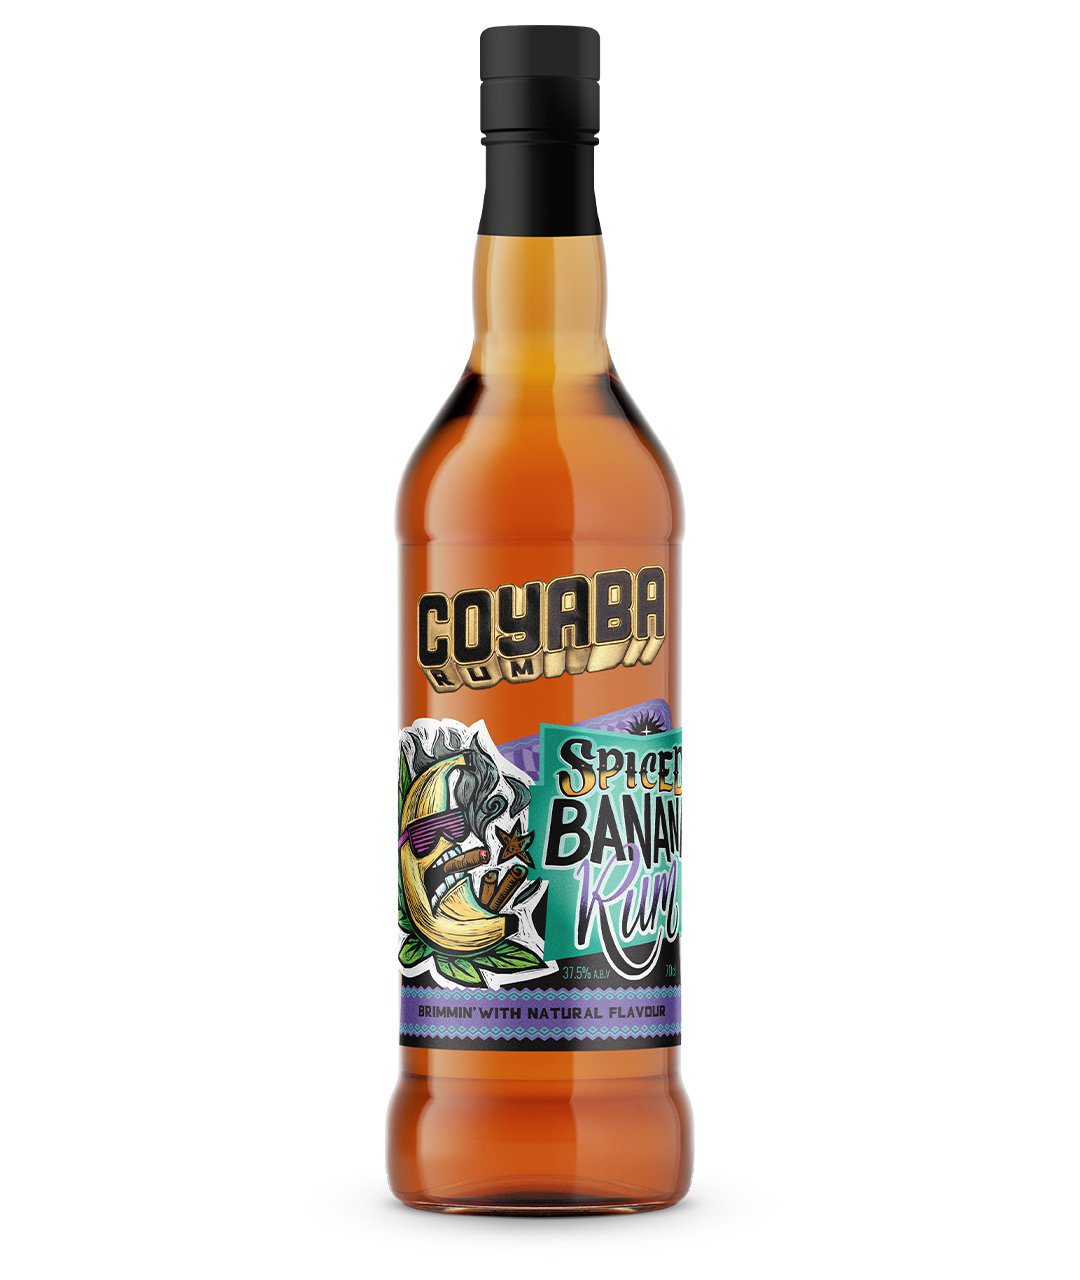 Coyaba Rum Design and Branding by Kingdom & Sparrow